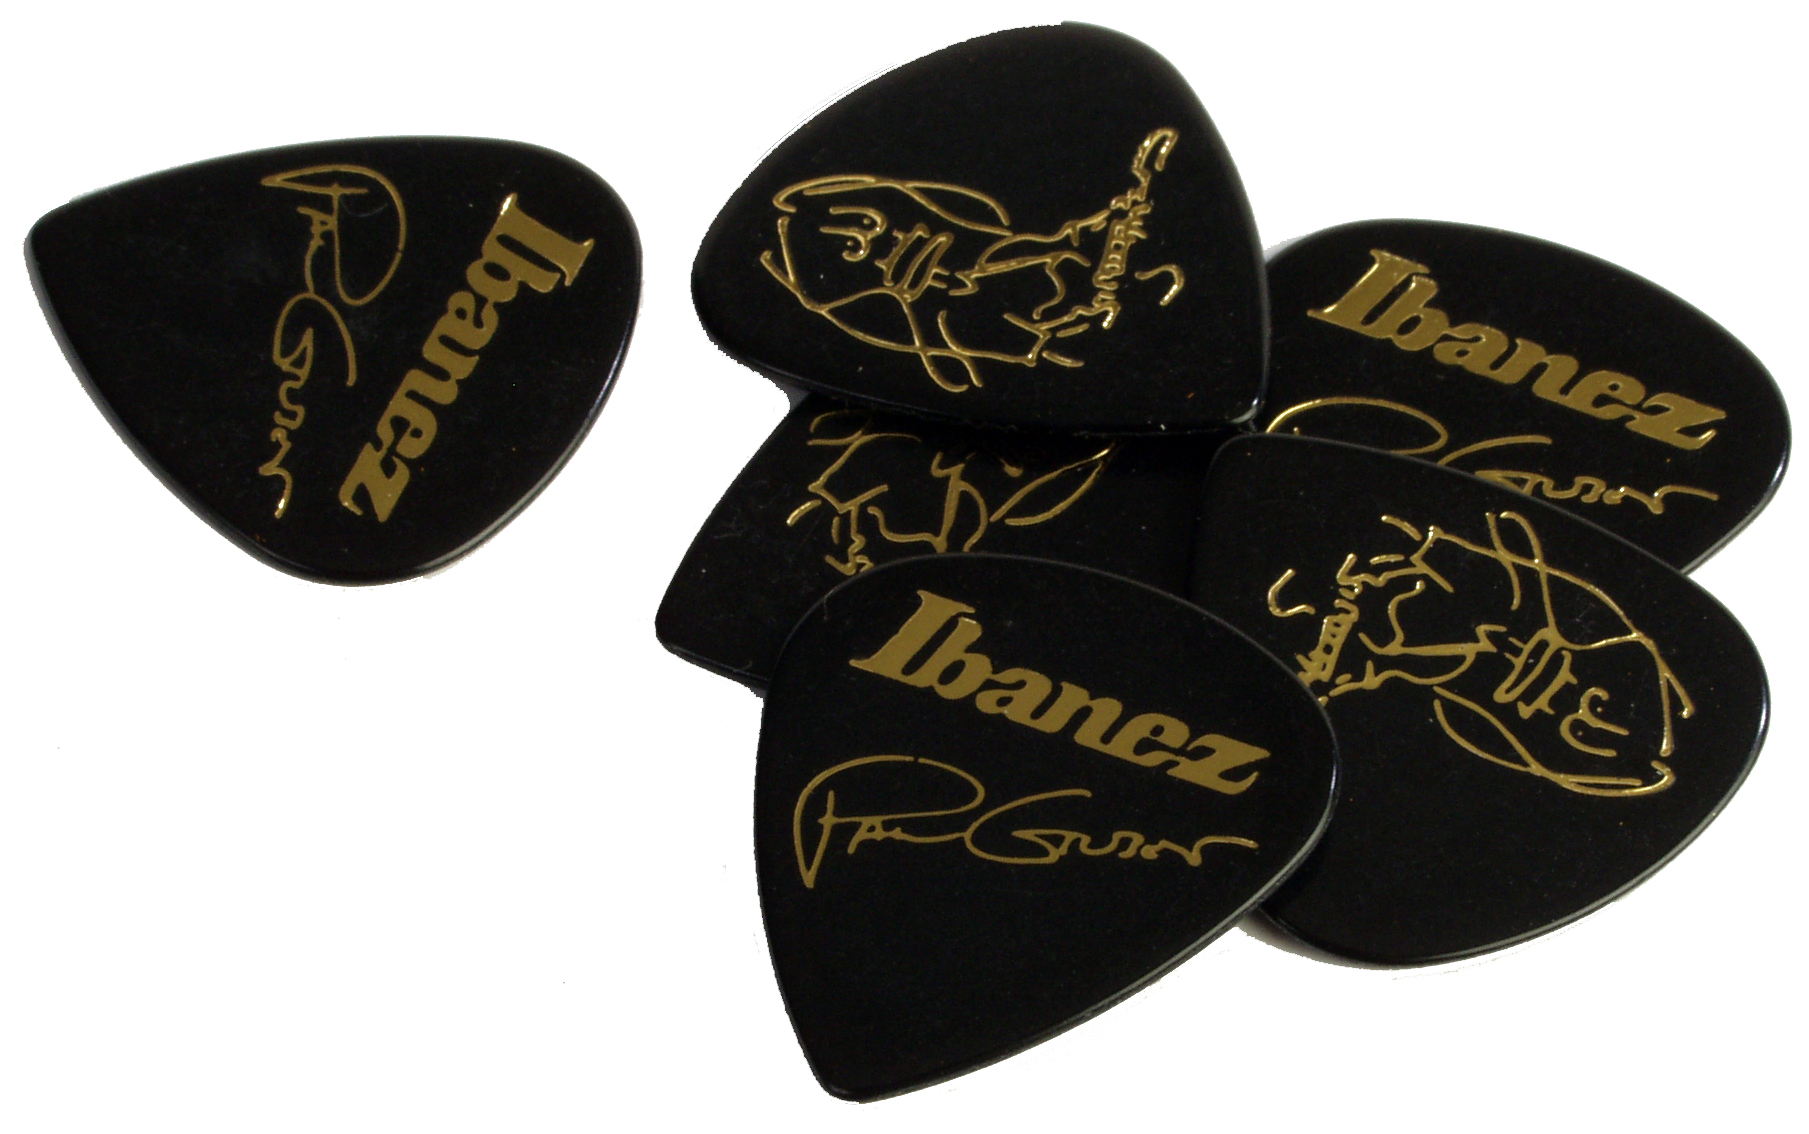 Ibanez Ibanez Paul Gilbert Signature Guitar Picks, 6 Pack - Candy Red